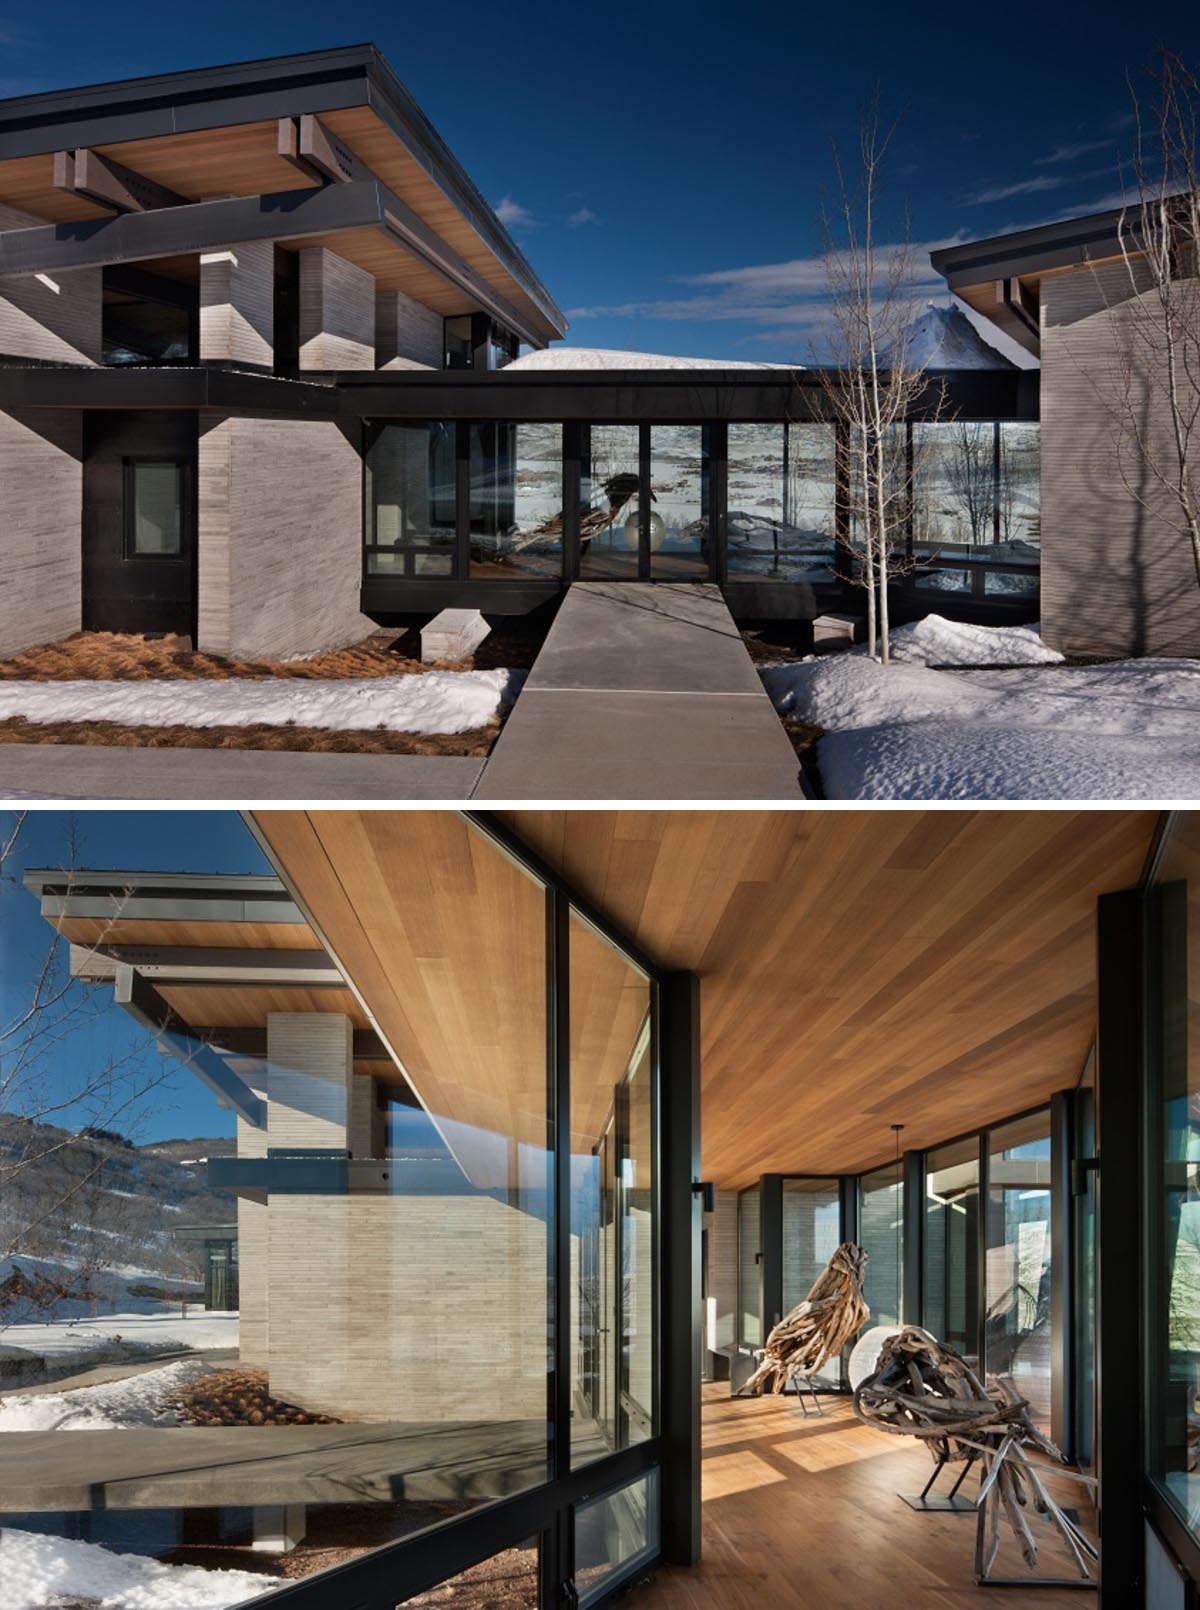 A modern house in the mountains includes cut limestone walls, wood beams, steel structure, and concrete floors.